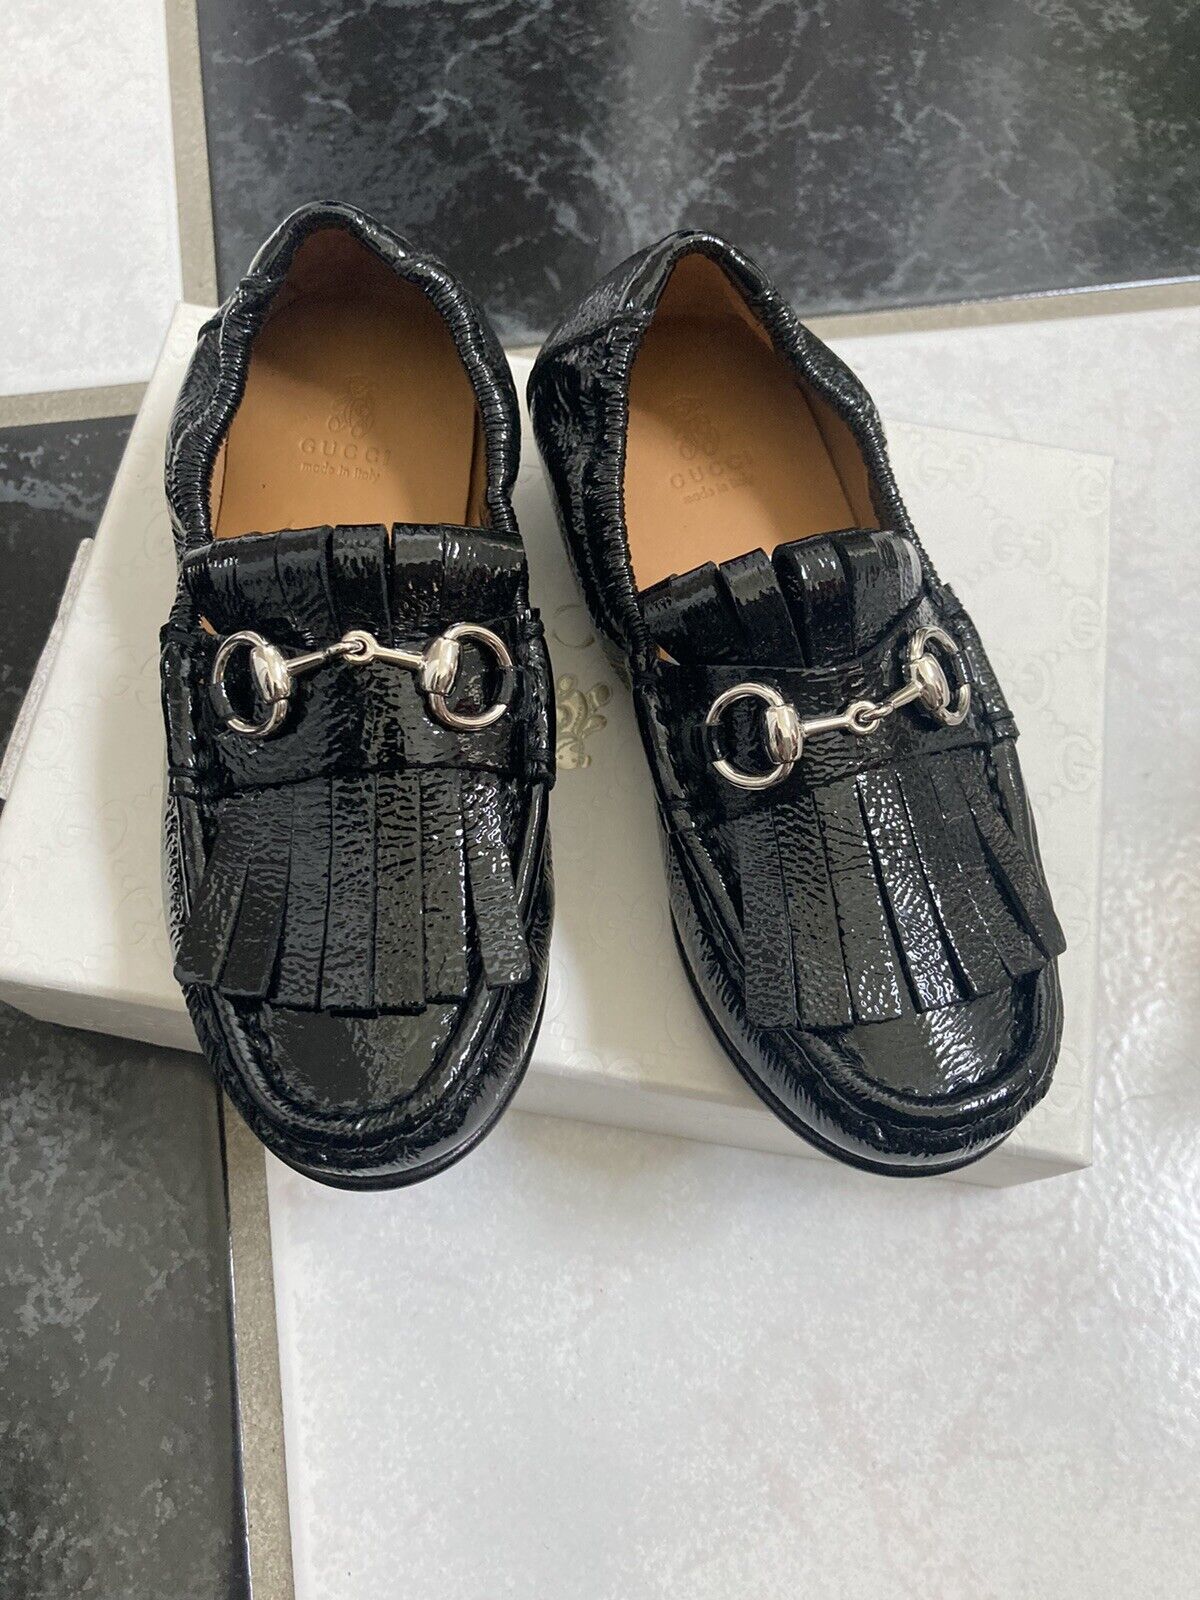 NIB 100% AUTH Gucci Toddler Boys Black Patent Leather Horsebit Loafer Shoes $365 - $178.00